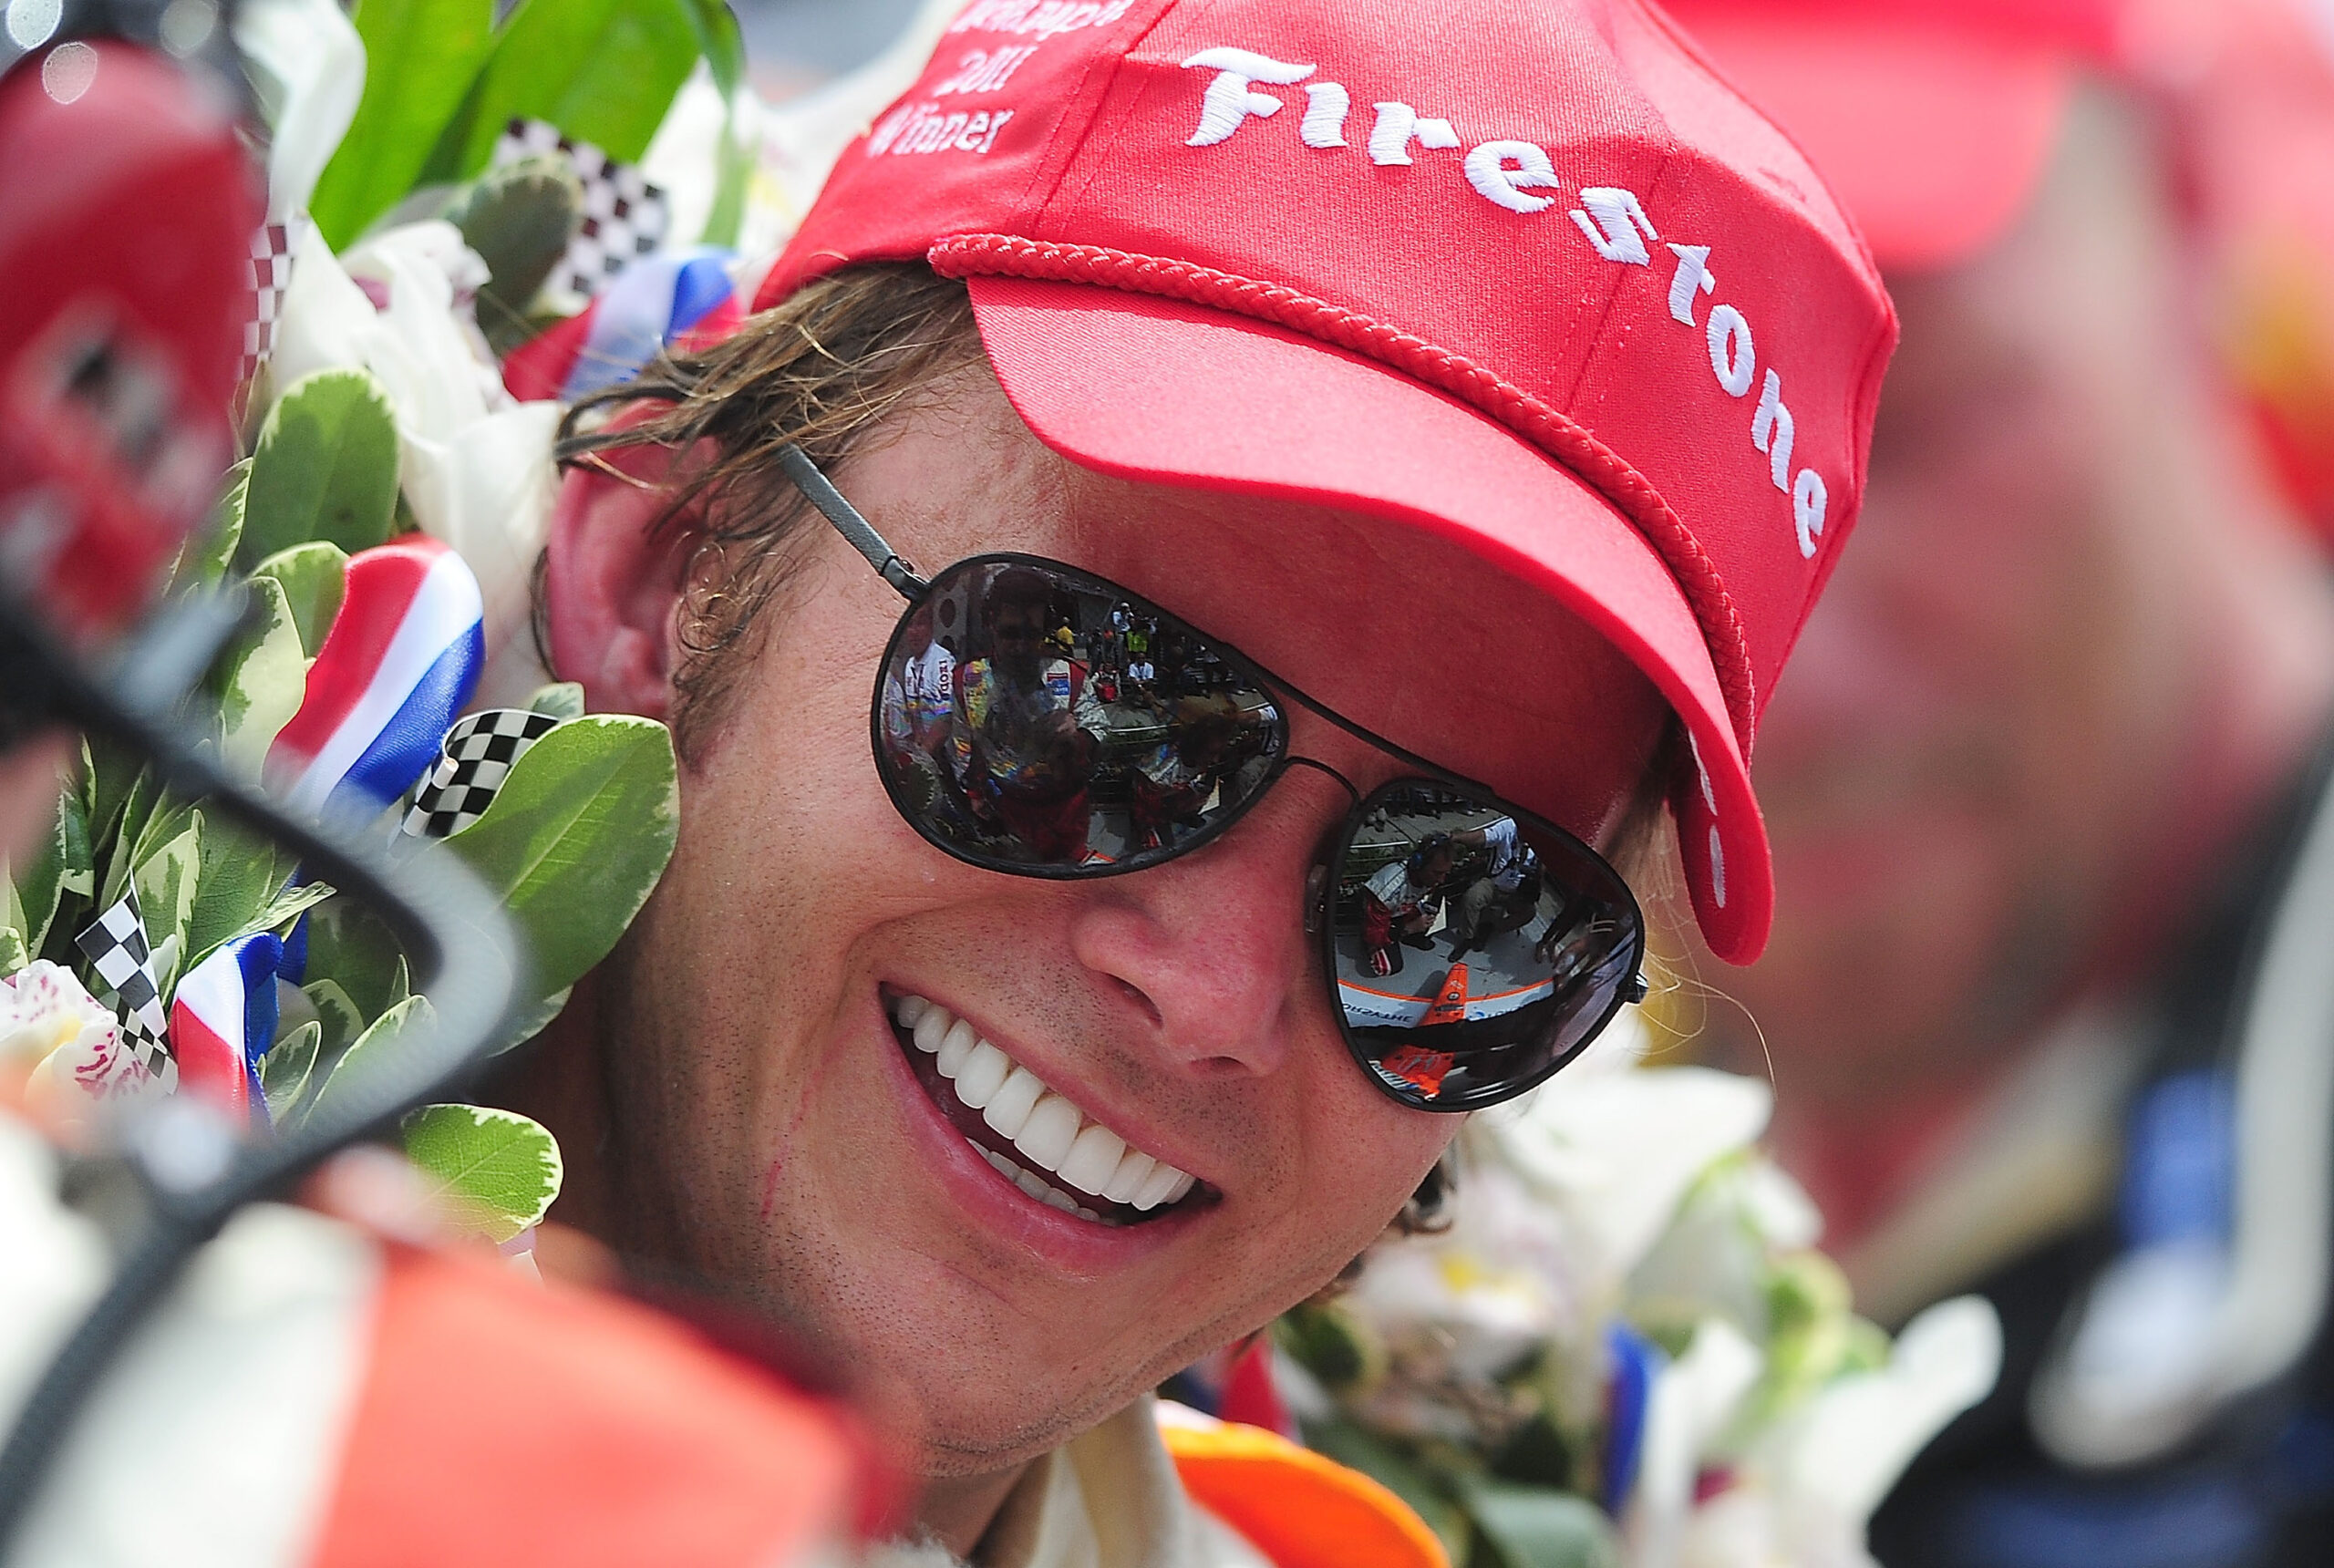 Dan Wheldon Celebrates his Indy 500 victory, May 29th 2011. Credit: Andrew Weber-USA TODAY Sports